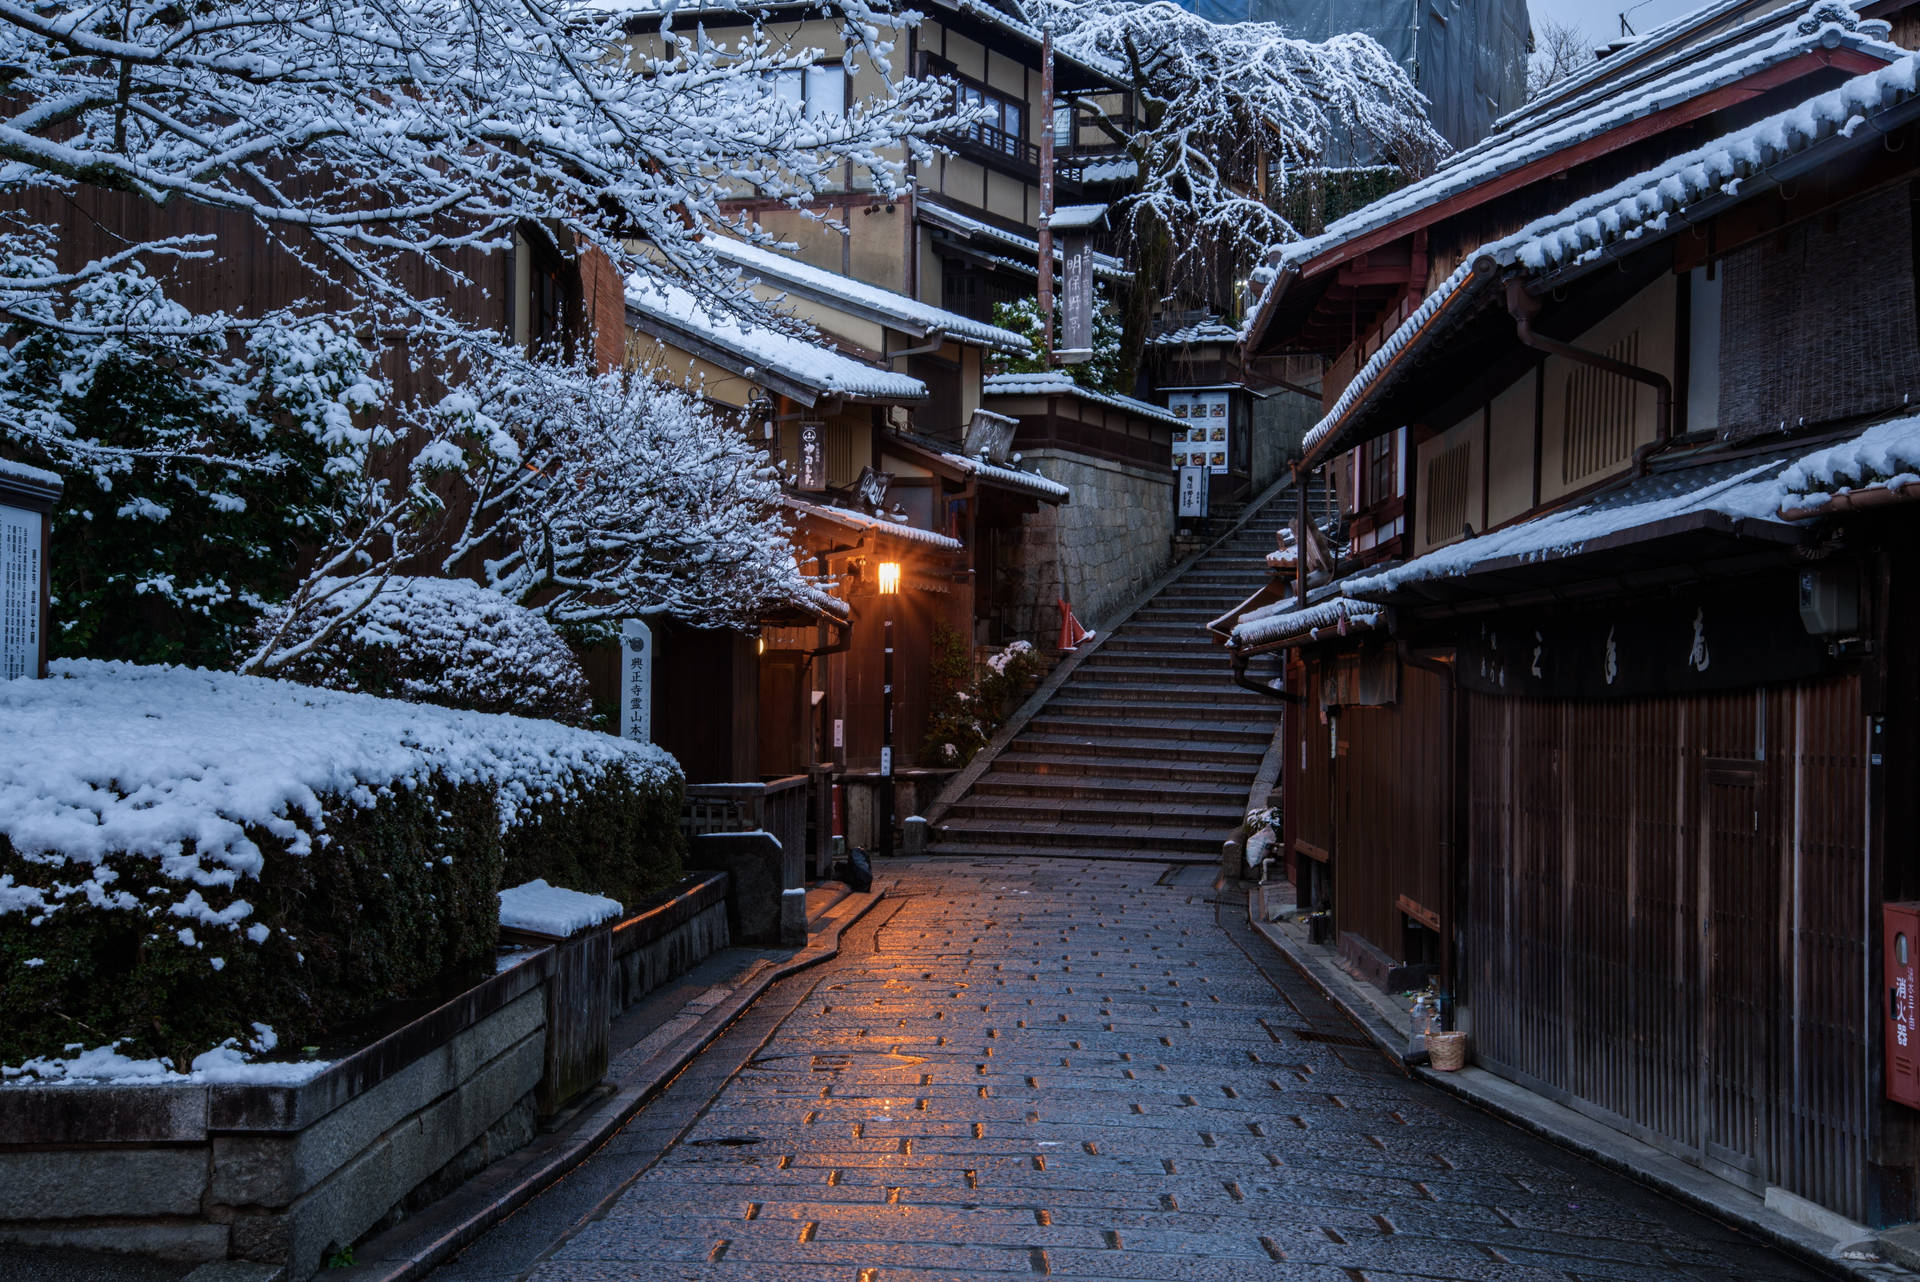 Snowy Kyoto Japan 4k Picture